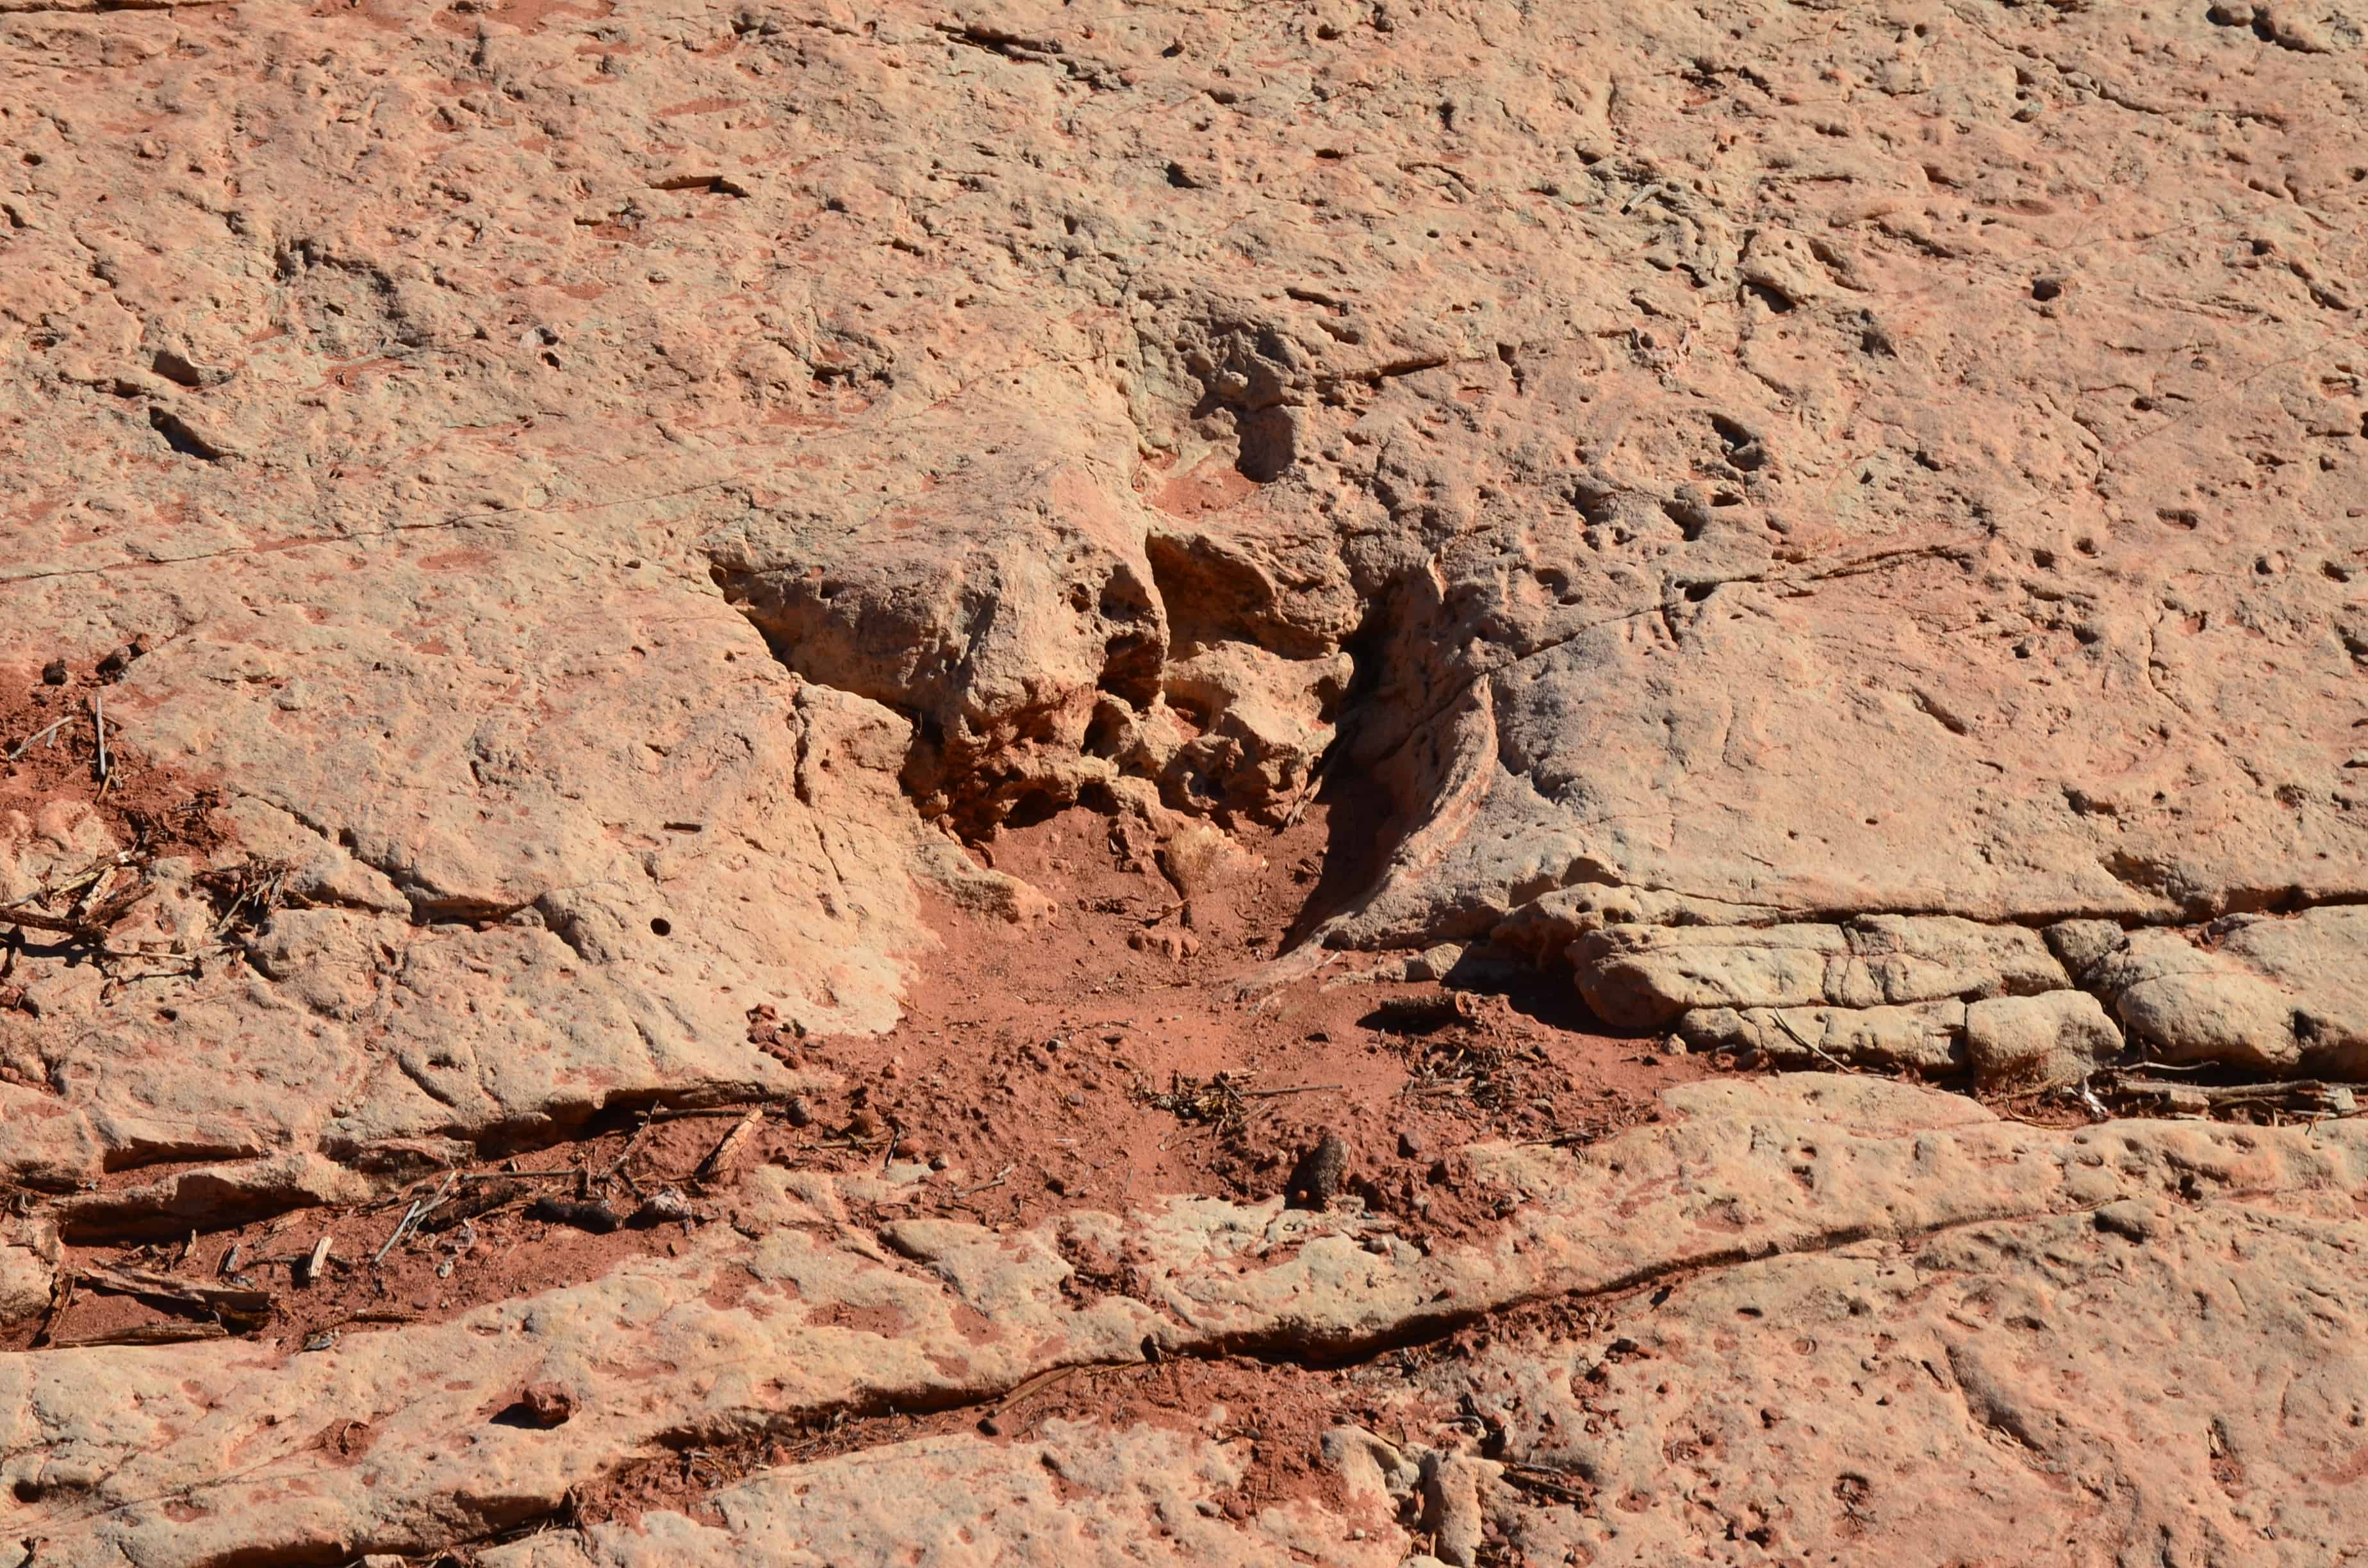 Dinosaur tracks on the Anasazi Trail at Red Cliffs Recreation Area in Utah